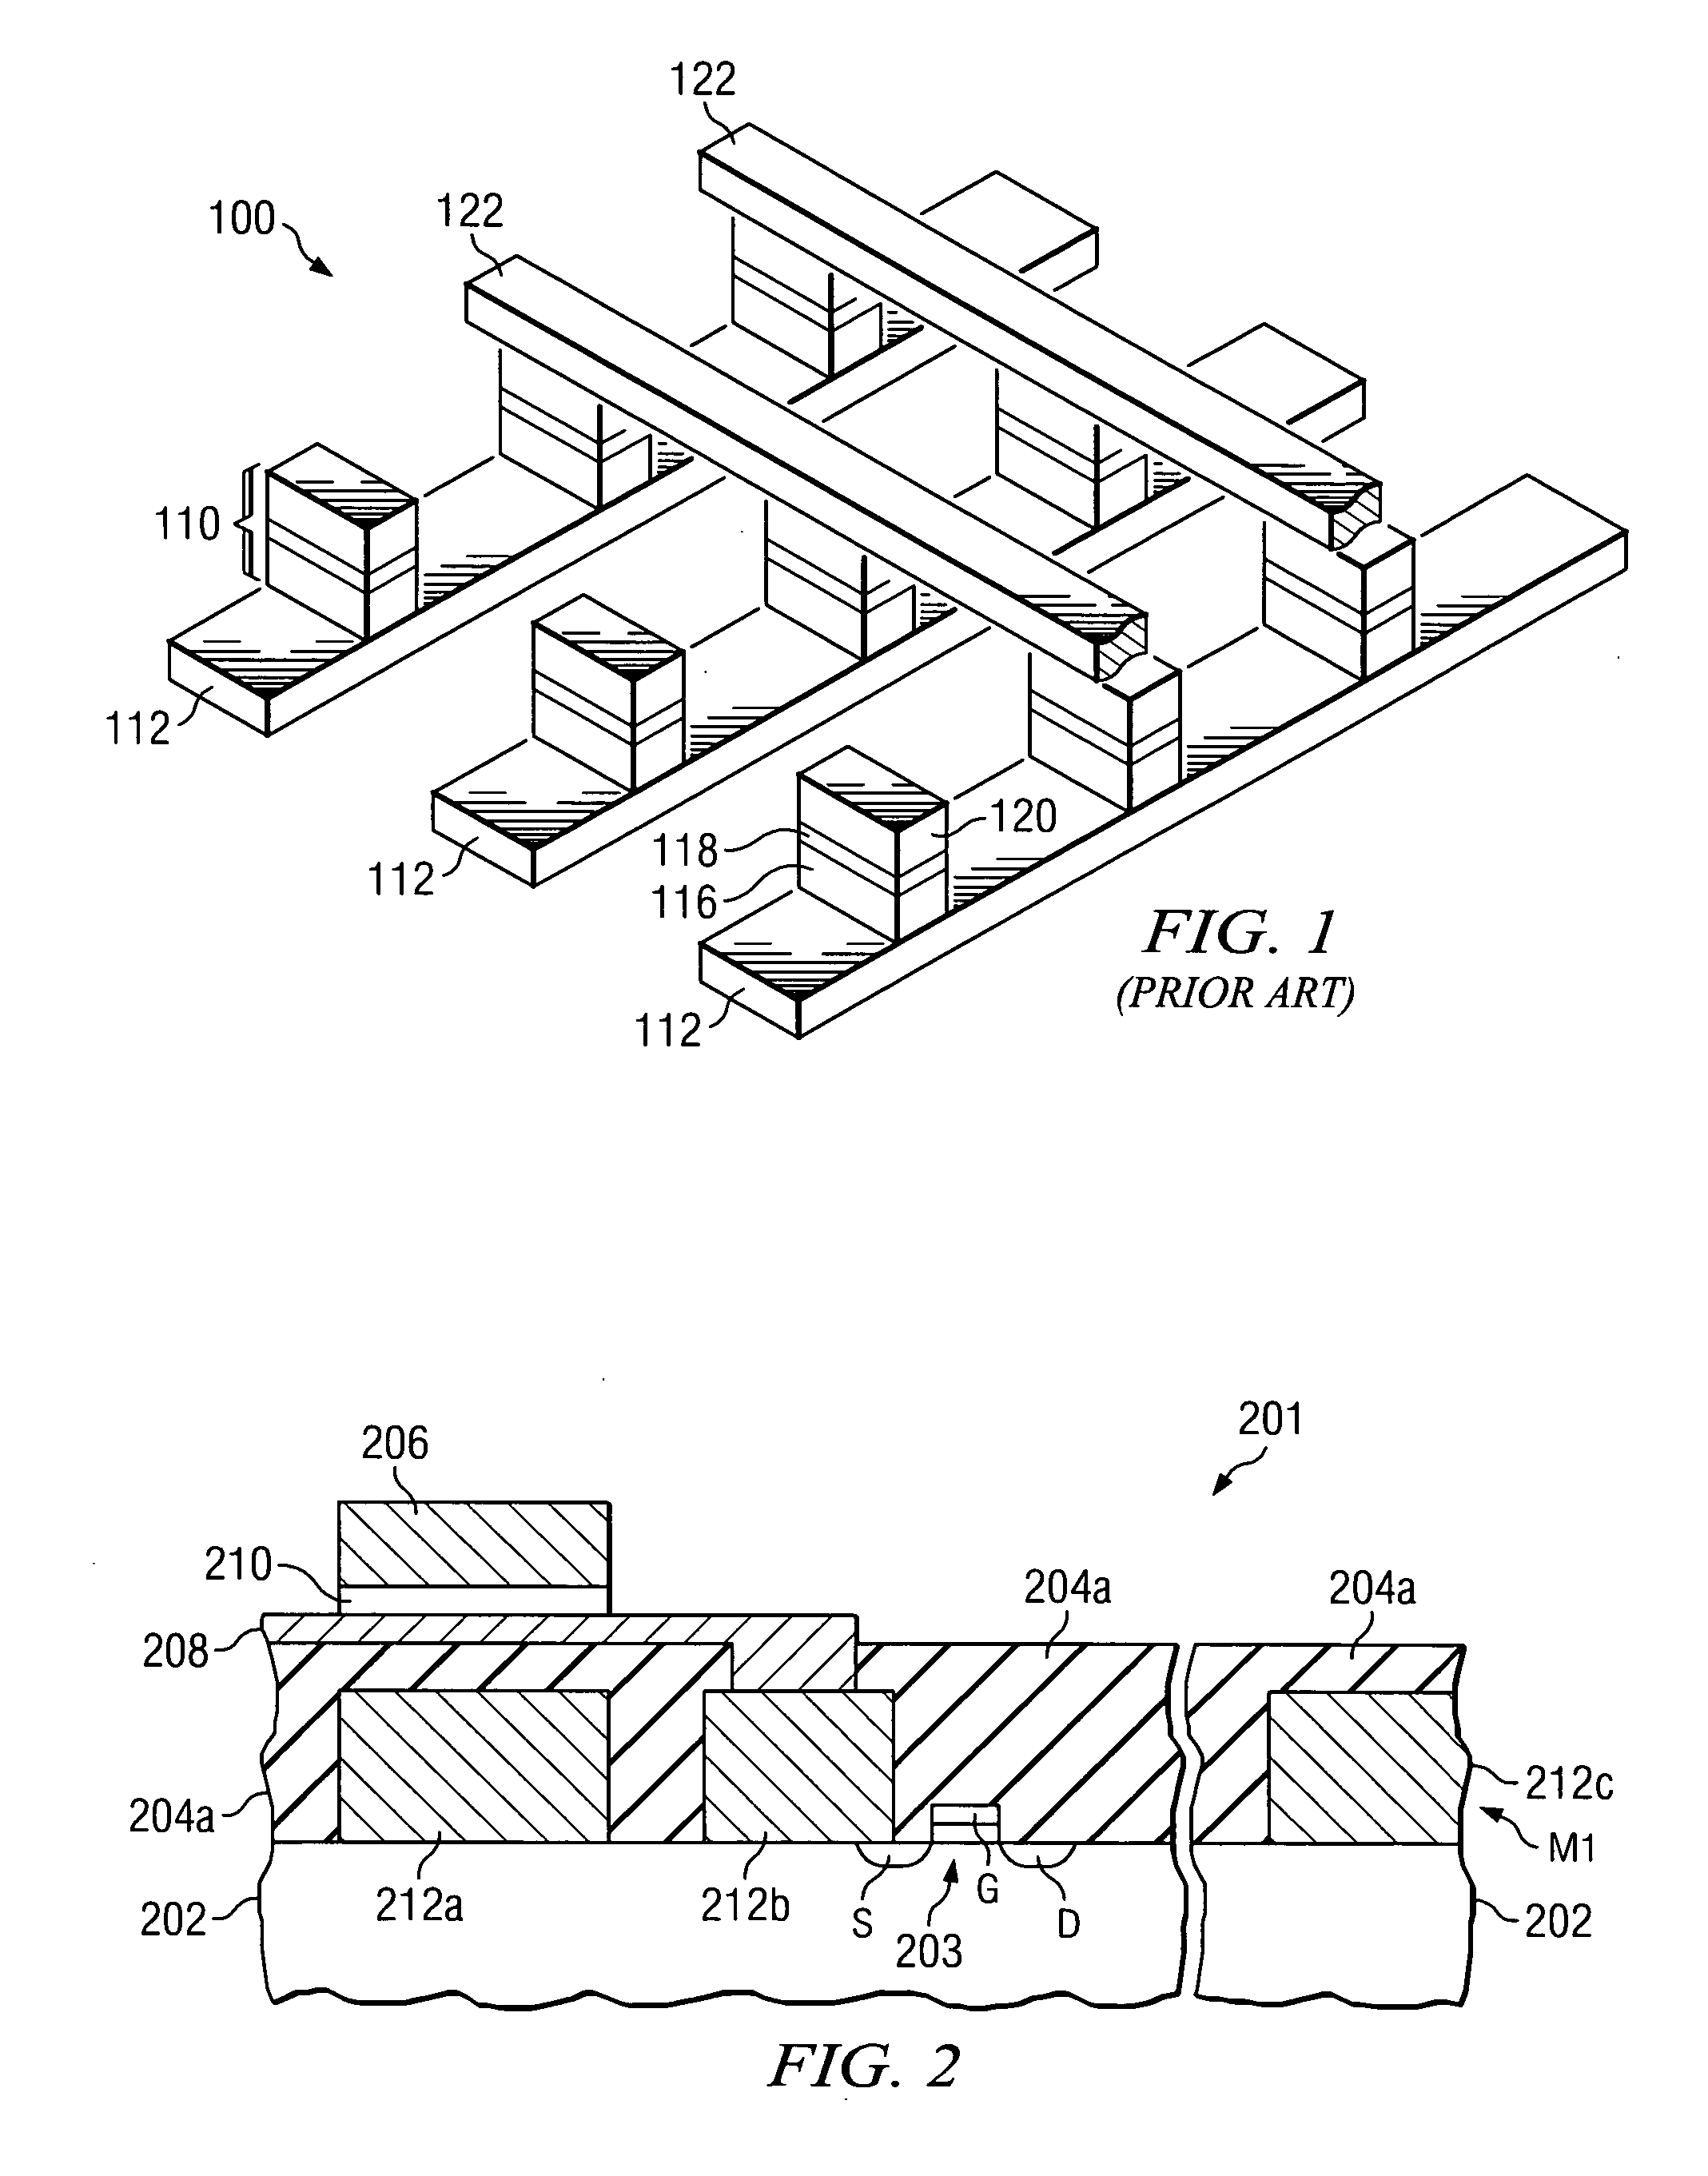 Ferromagnetic liner for conductive lines of magnetic memory cells